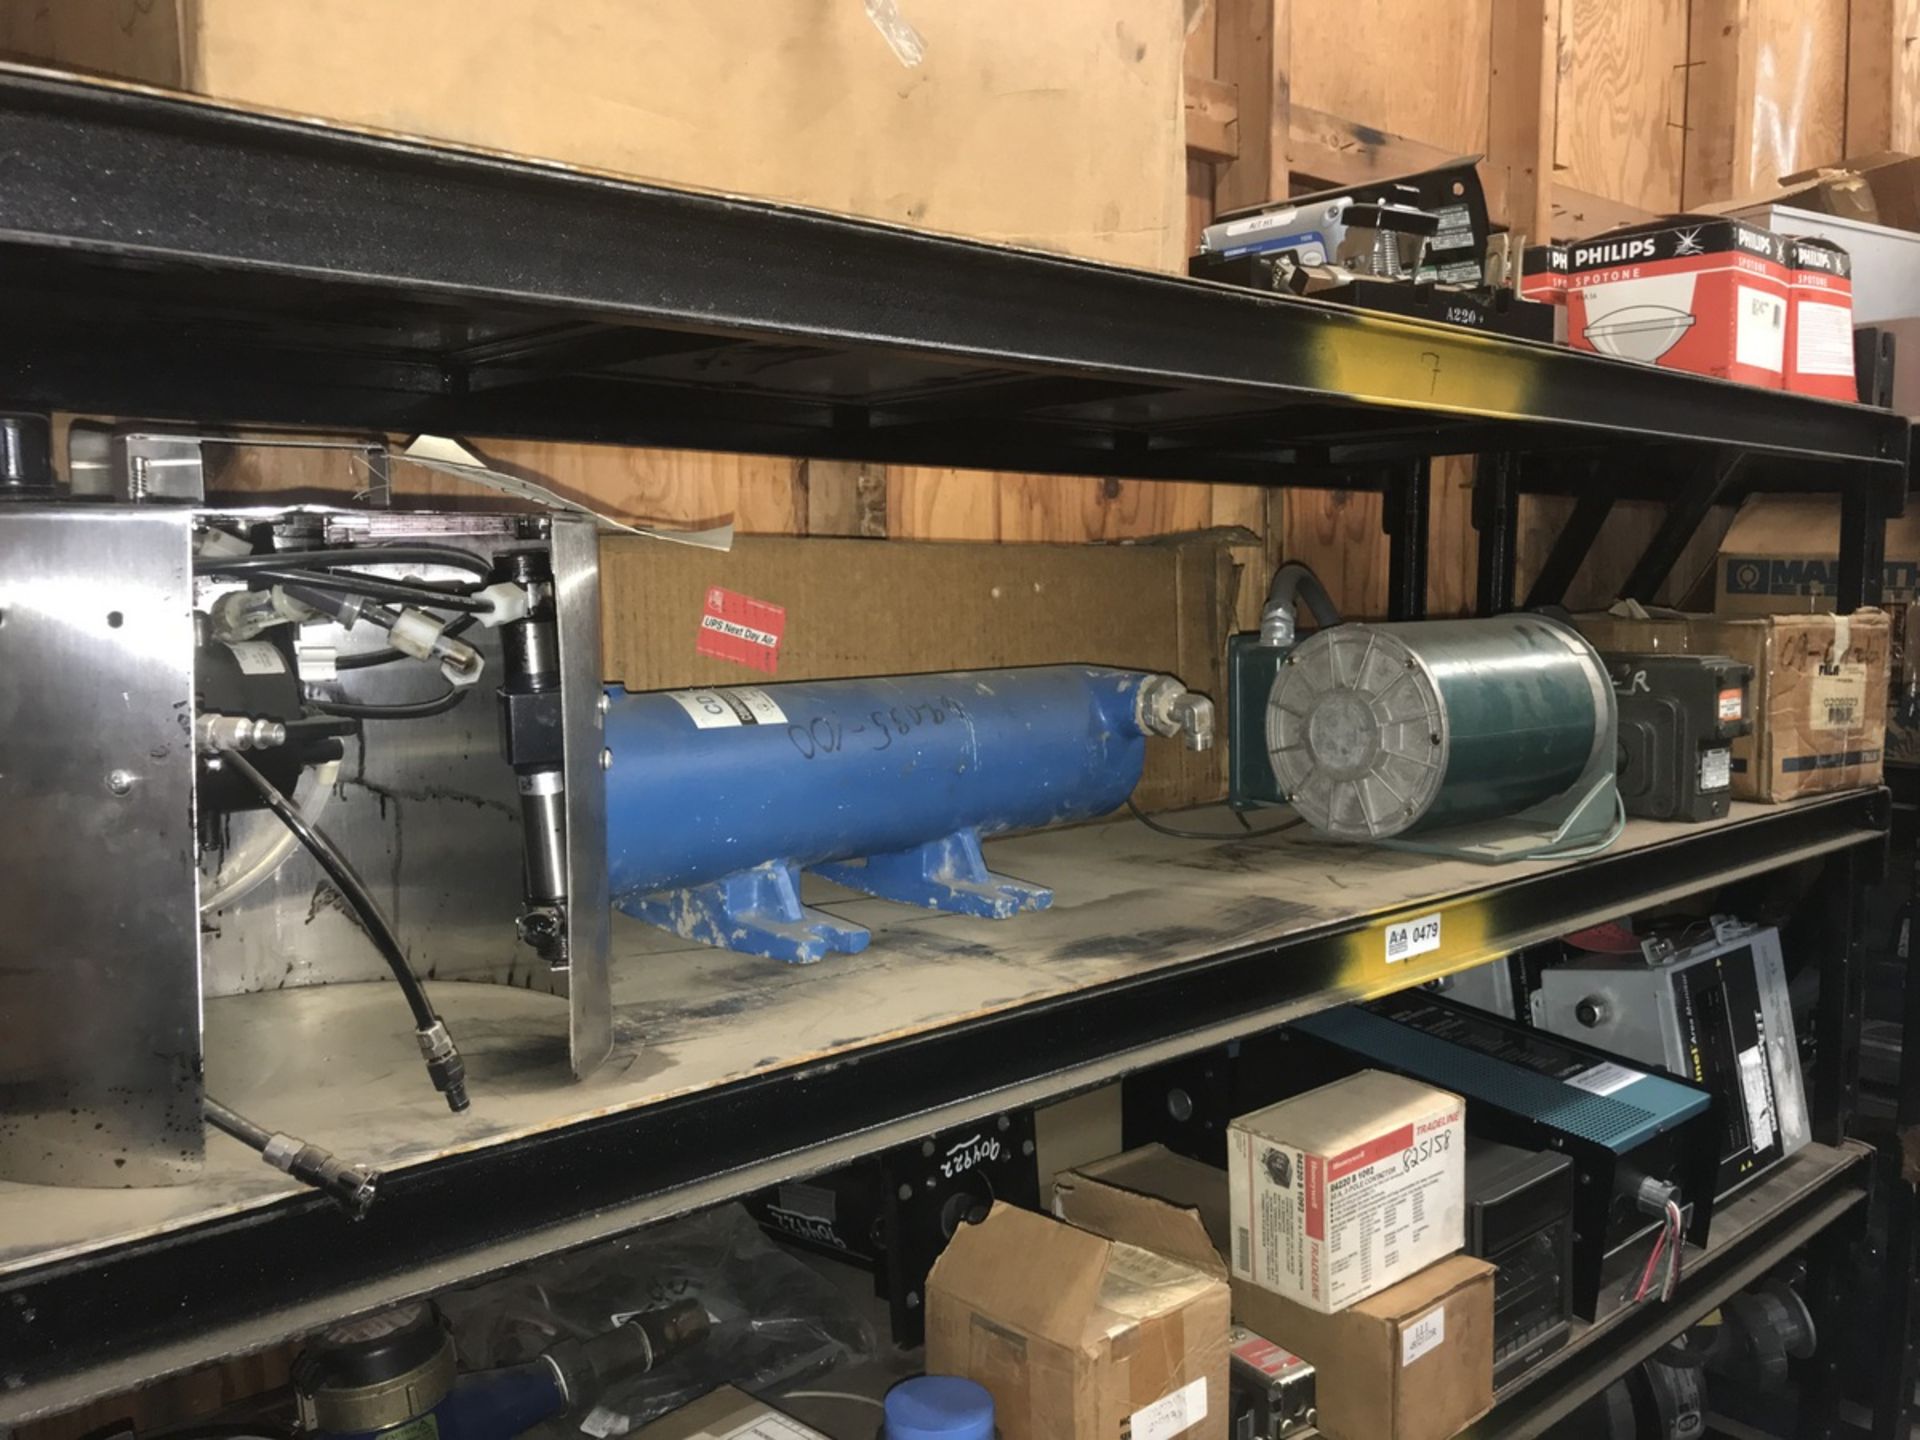 Contents of Shelf including Compressed Air Dryer Filter, Motors, Gear Reducers and Hubs